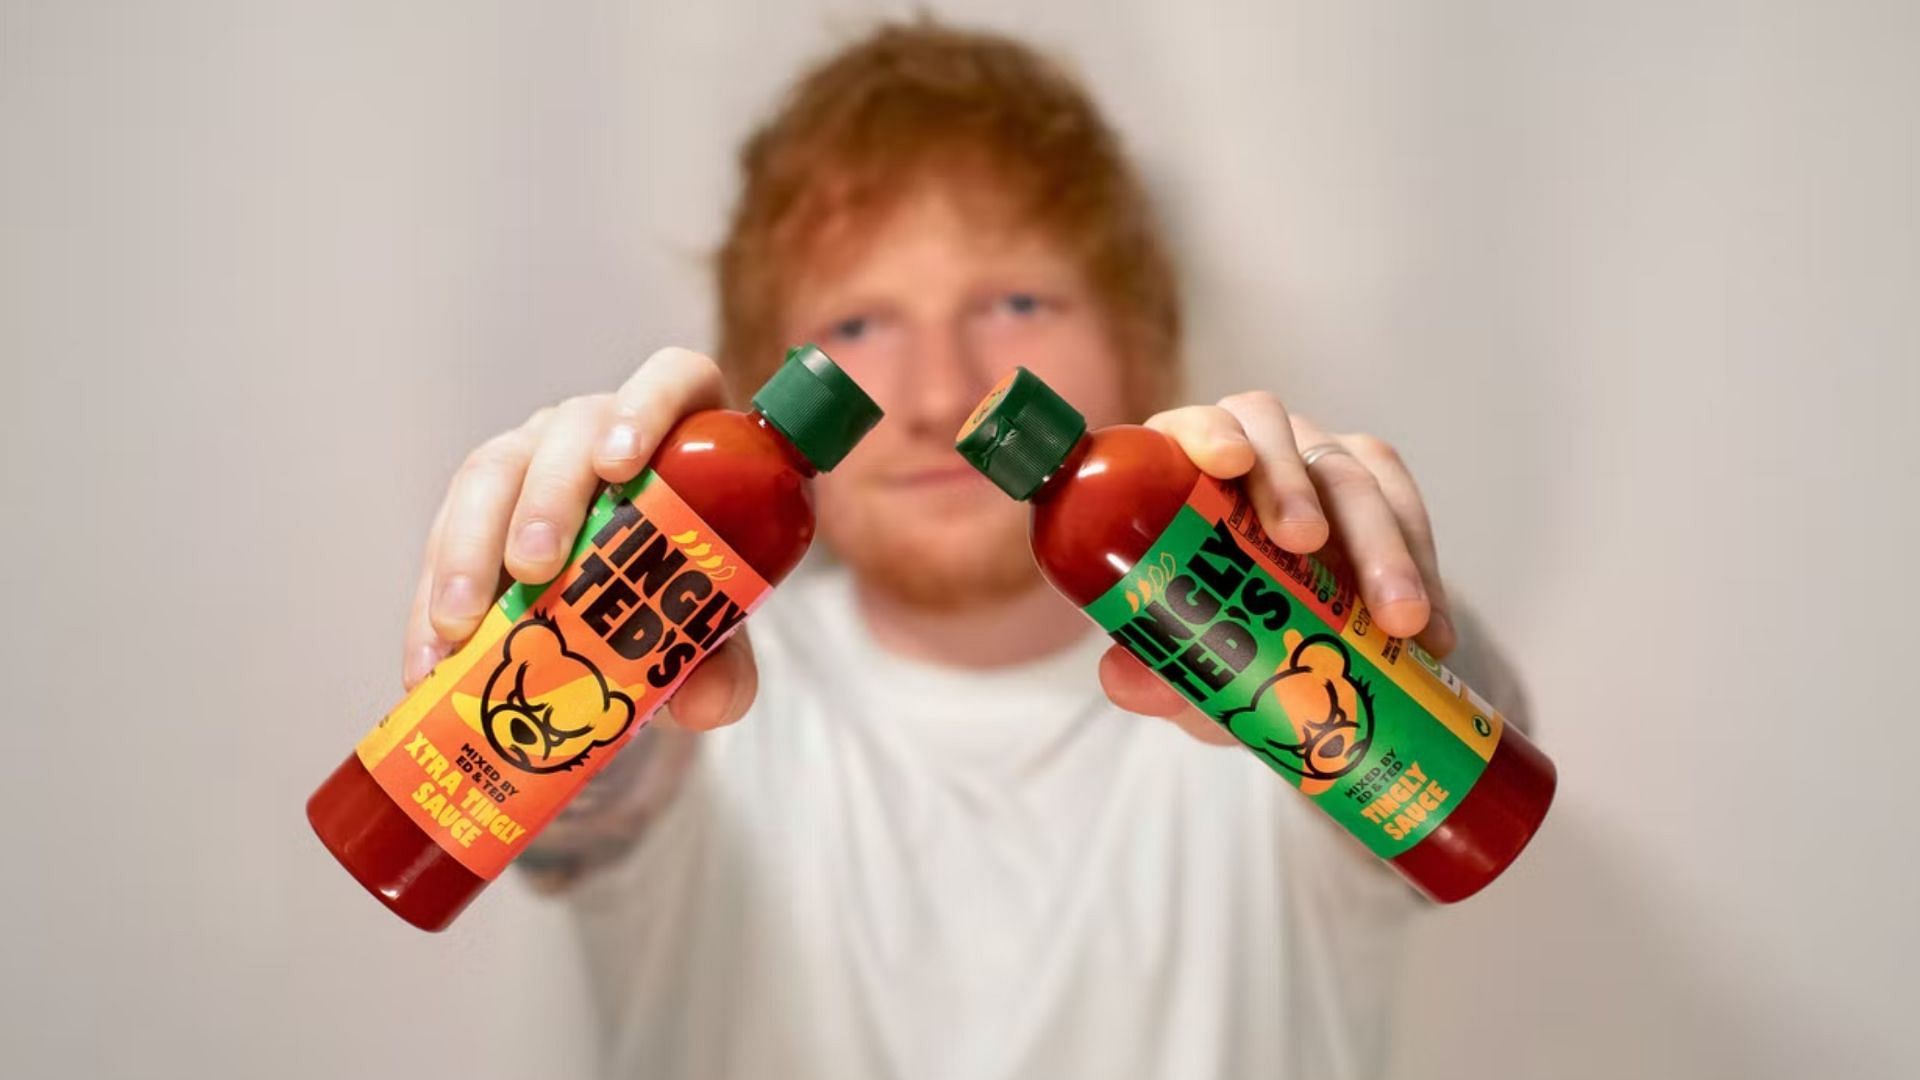 Singer Ed Sheeran introduces the new &lsquo;Tingly Teds&rsquo; Hot Sauces (Image via Ed Sheeran/Instagram)